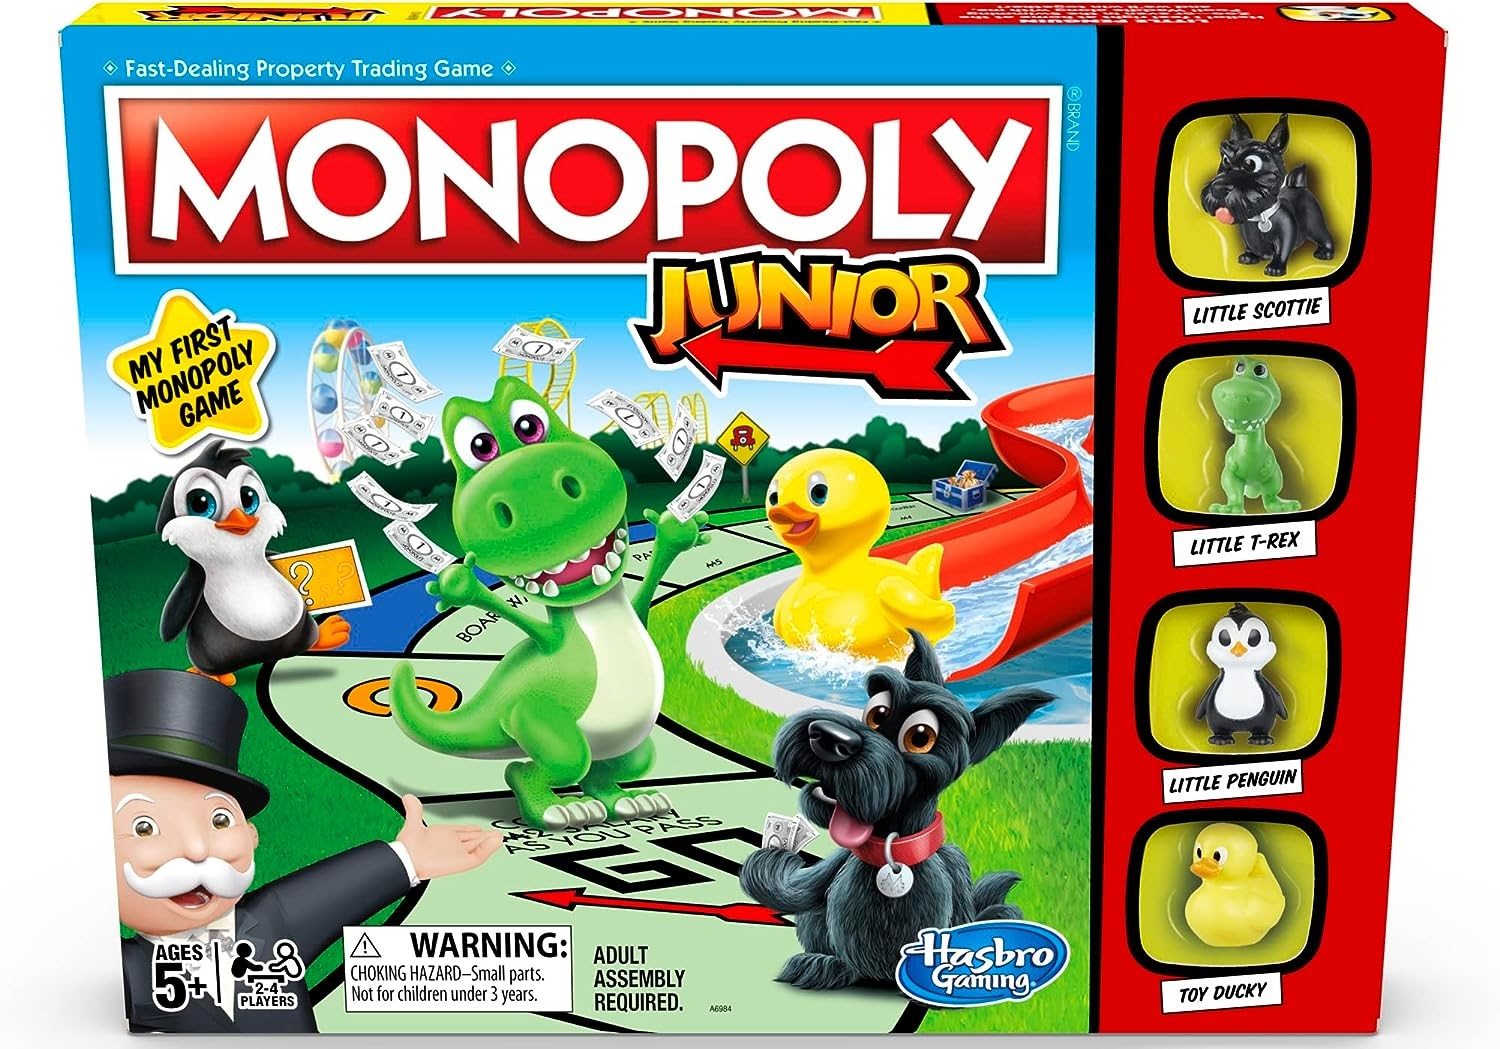 17-fascinating-facts-about-monopoly-junior